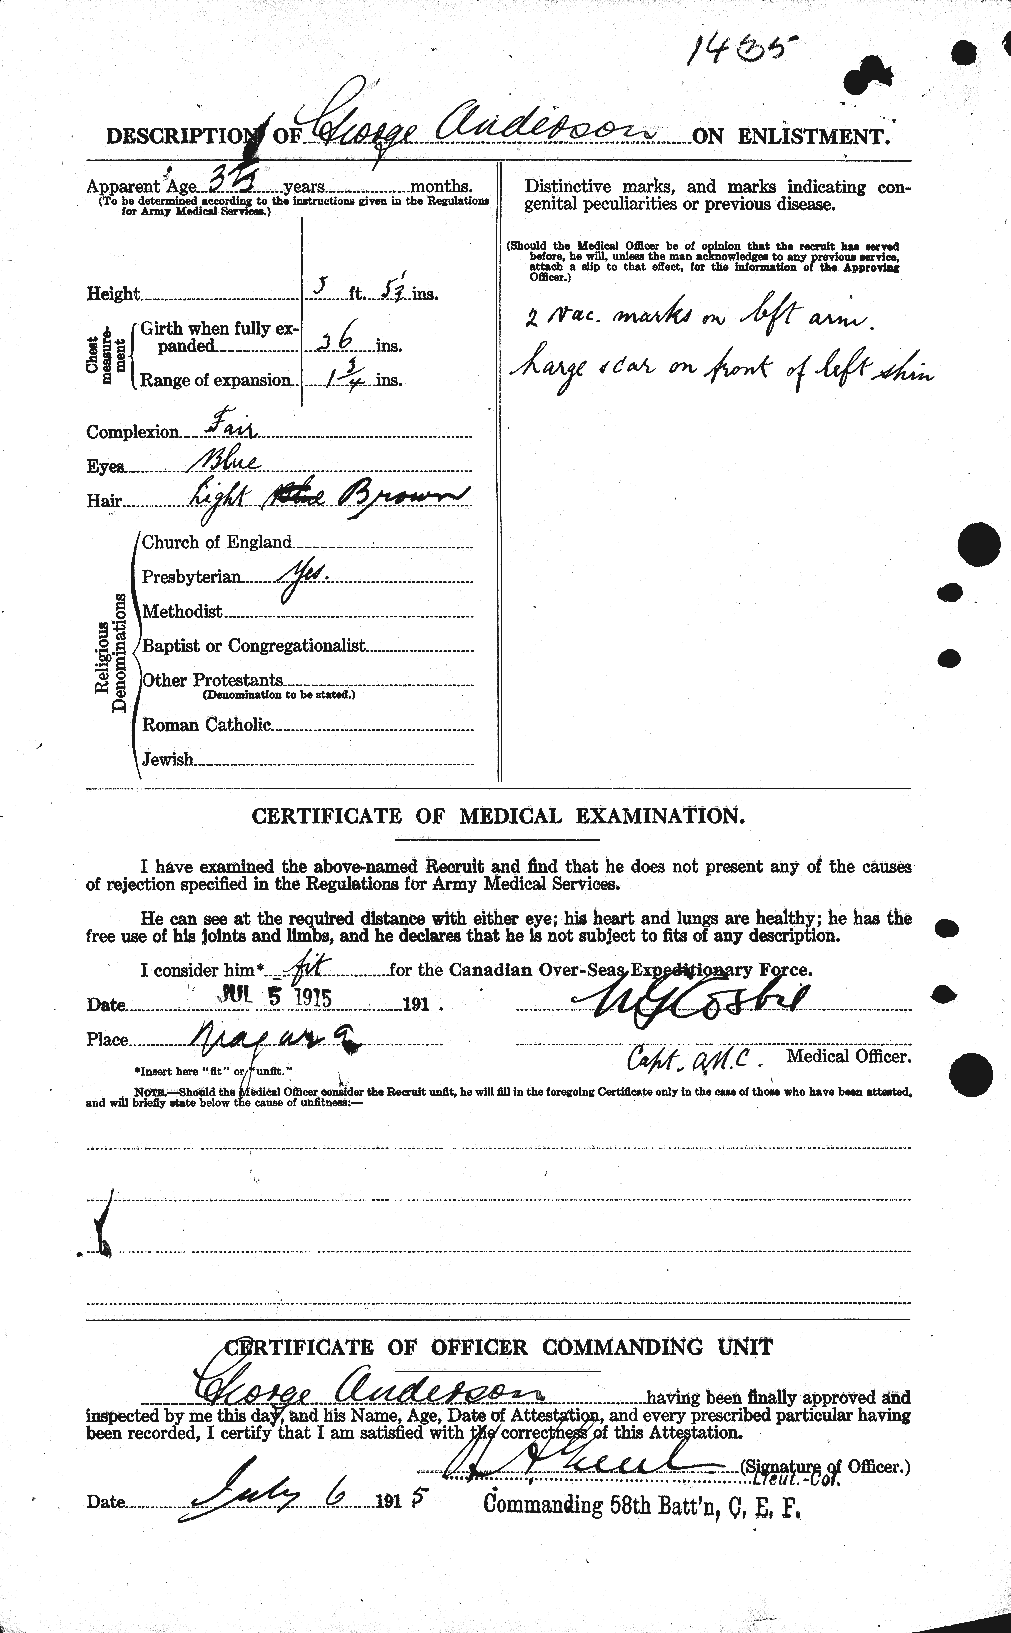 Personnel Records of the First World War - CEF 209778b